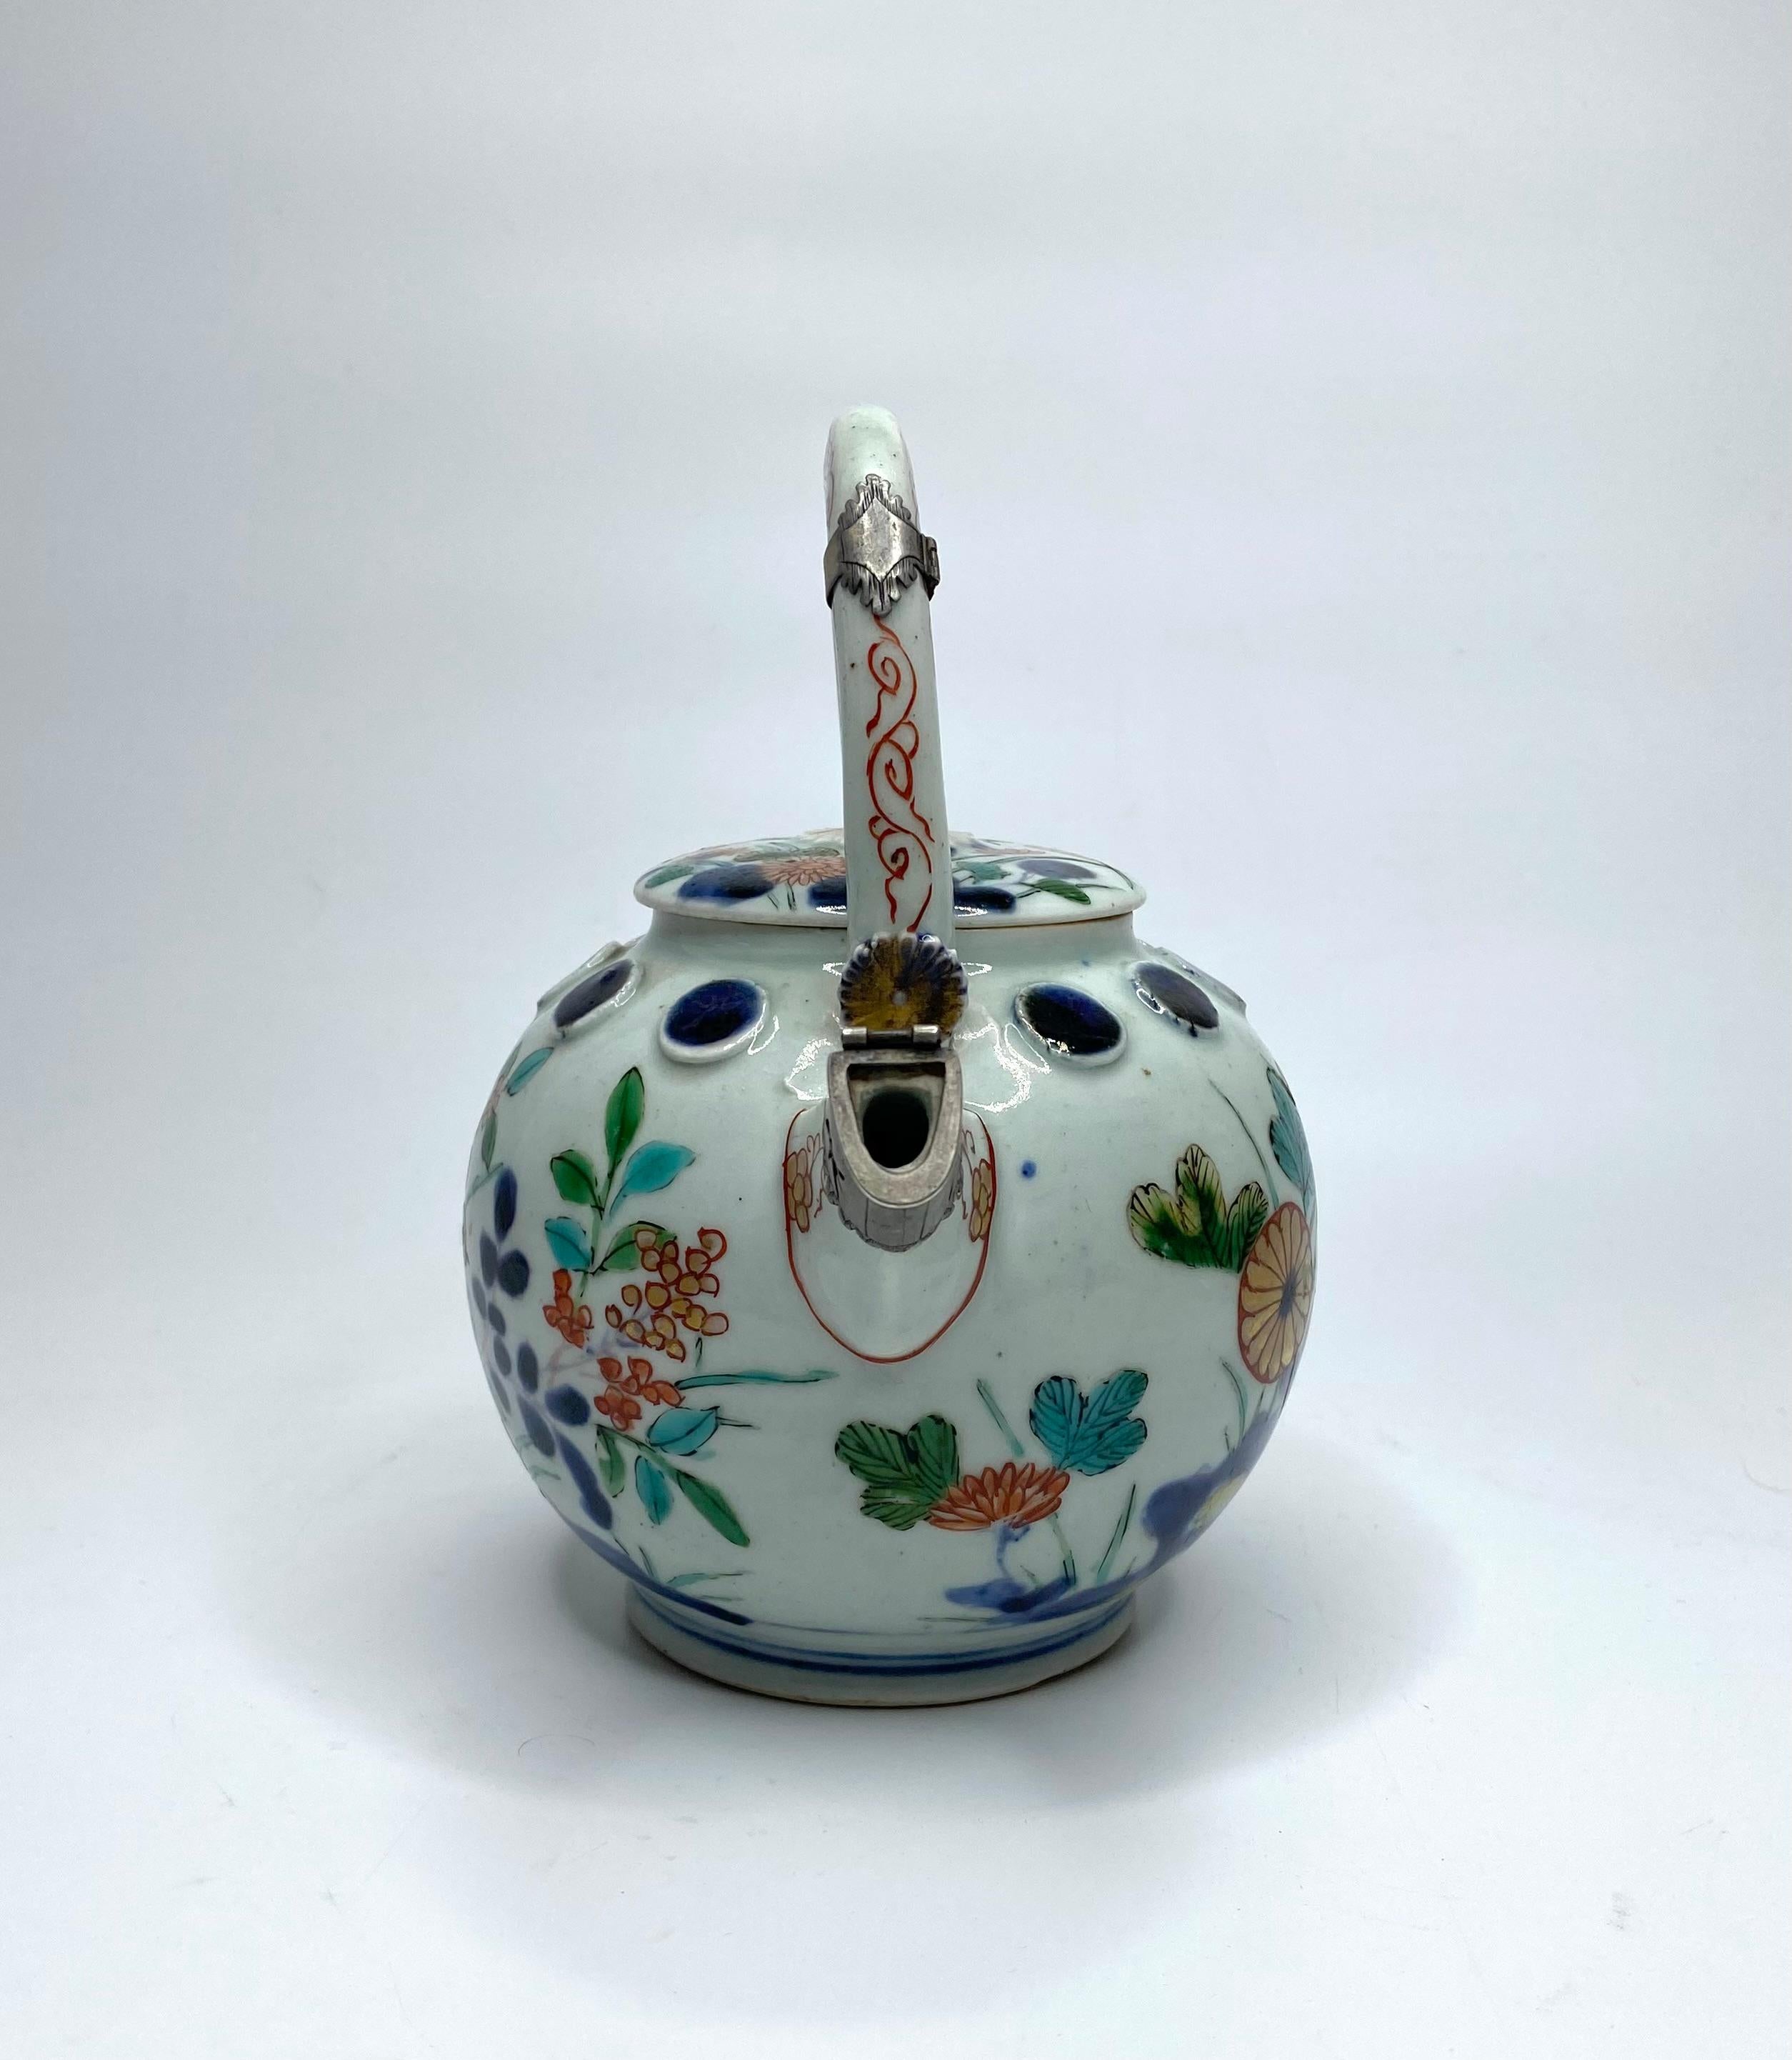 Imari sake ewer and cover, Arita, Japan, c. 1700, Edo Period. The globular ewer, with an unusual continuous band of circular moulded bosses, and vibrantly painted with flowering plants growing around rocks, in typical Imari style, with the addition